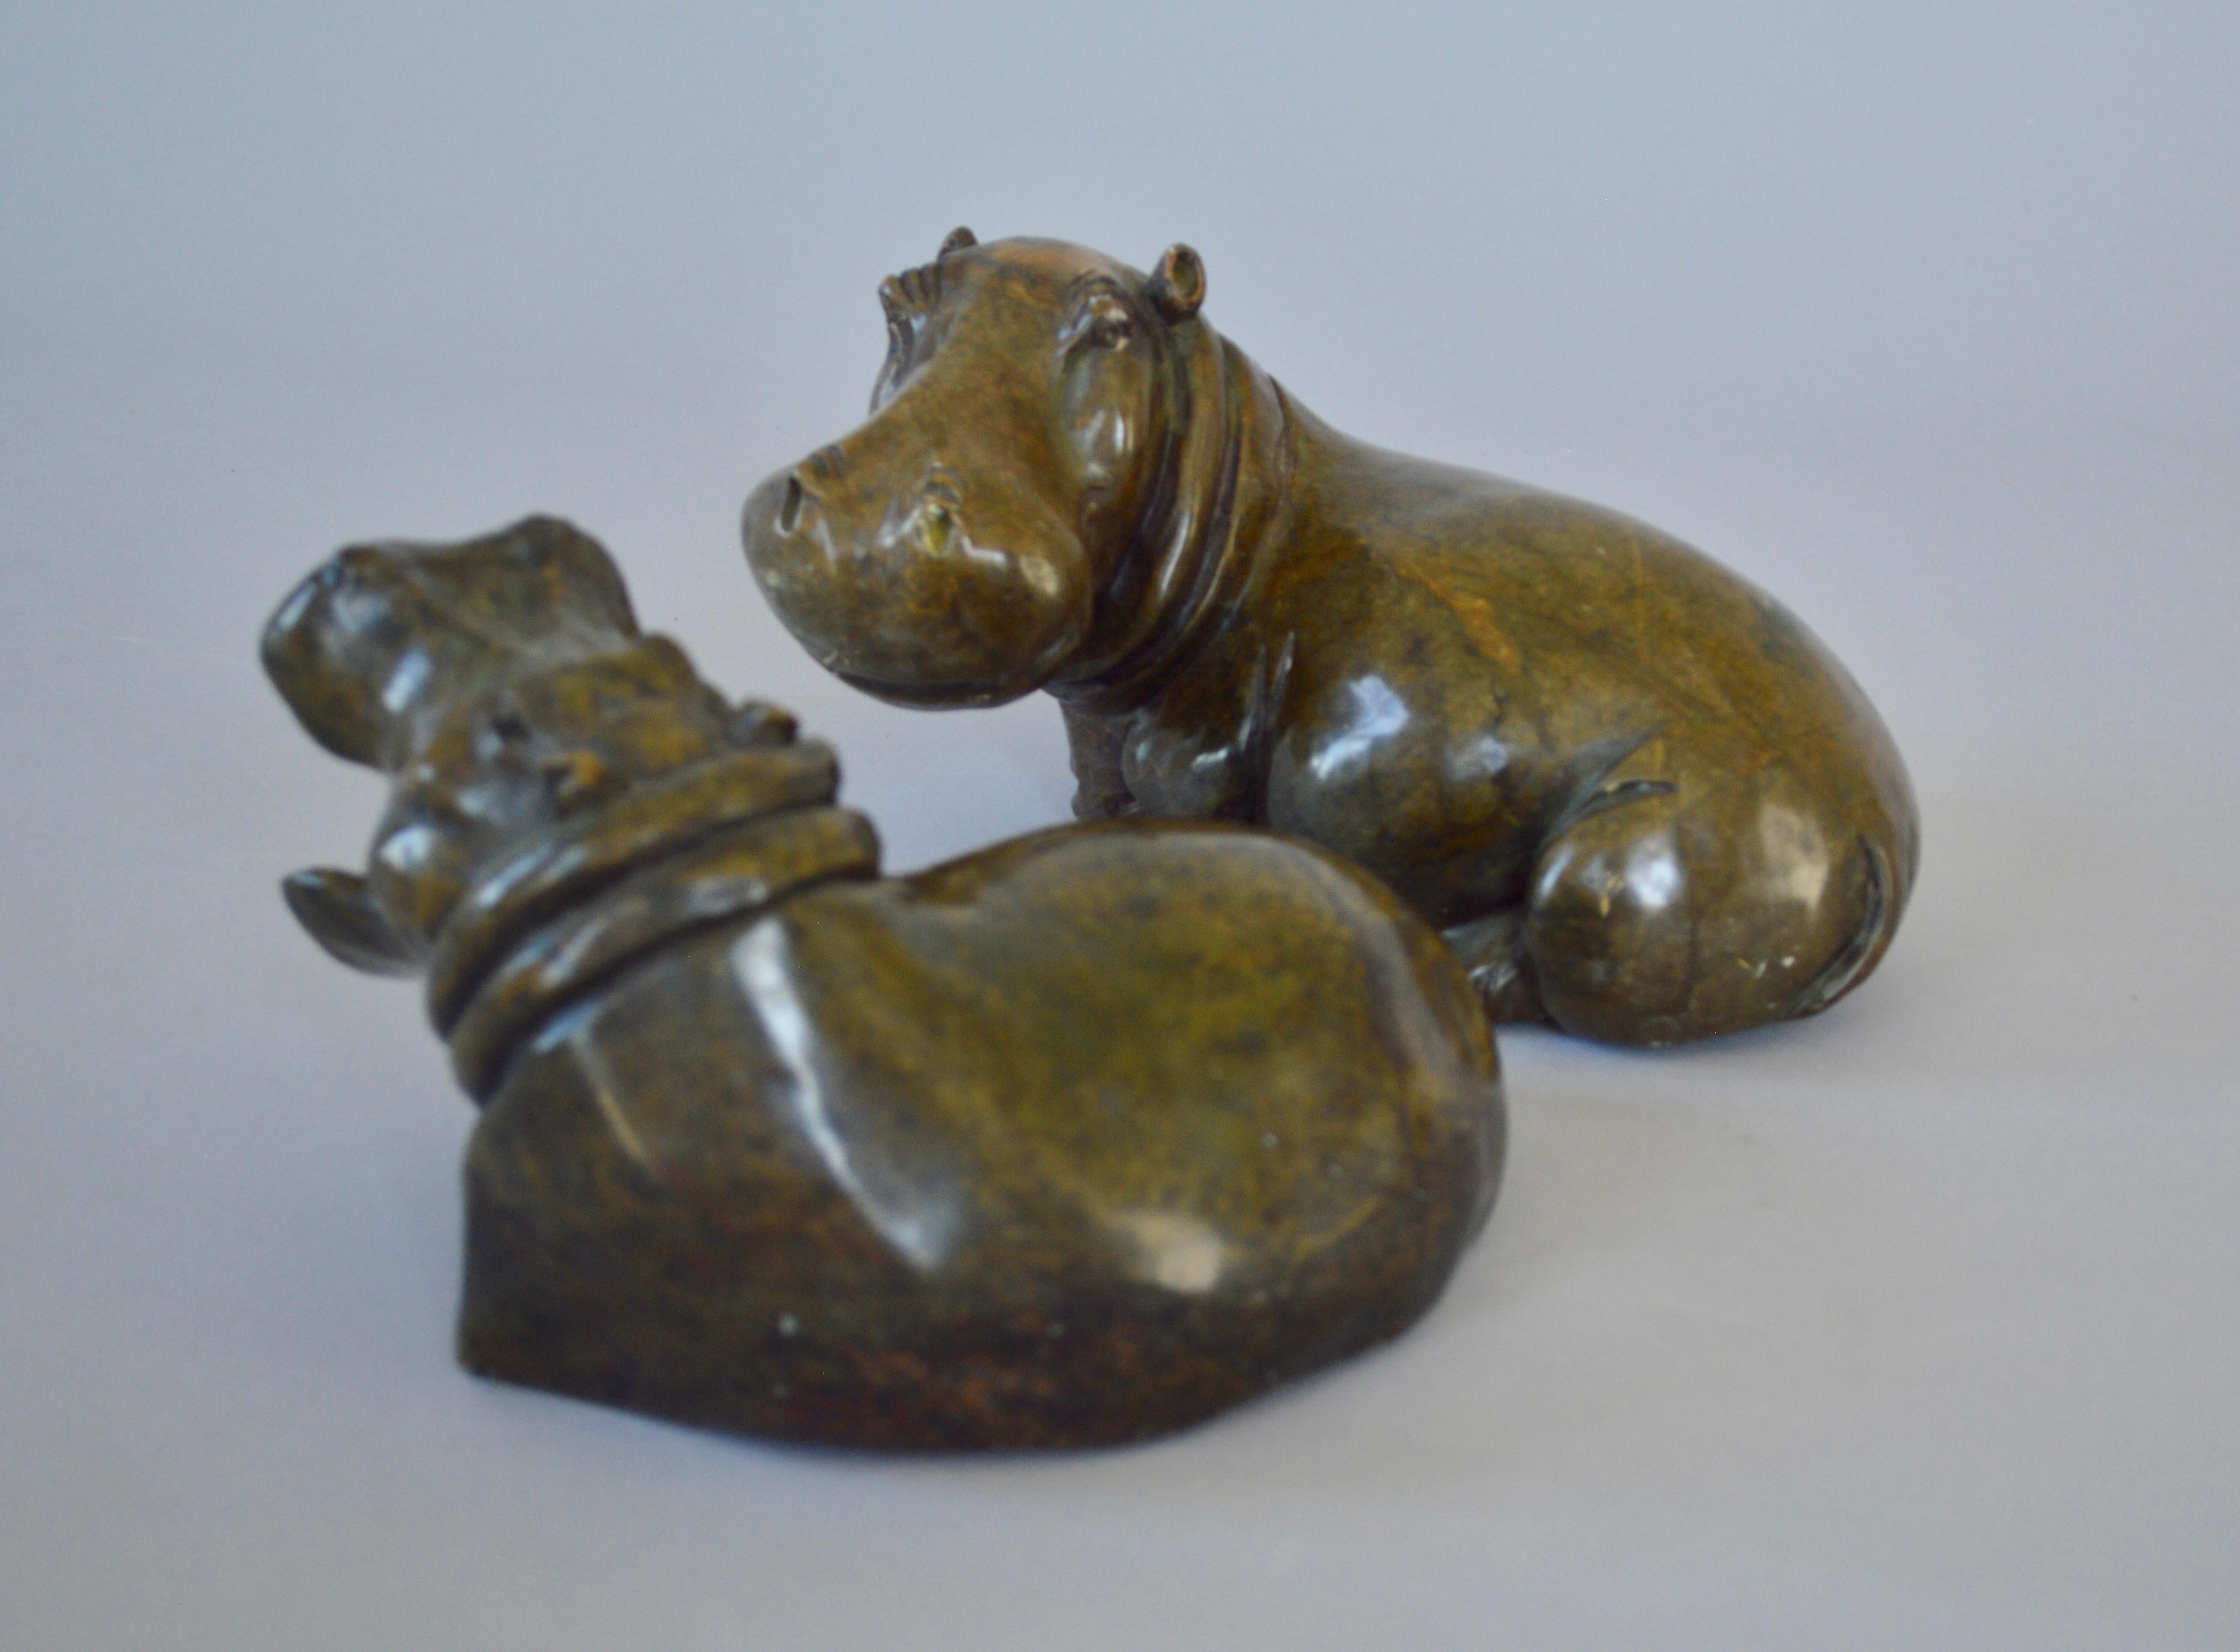 Midcentury pair of green hippopotamus sculptures, one of them with open mouth. Carved in green soapstone.